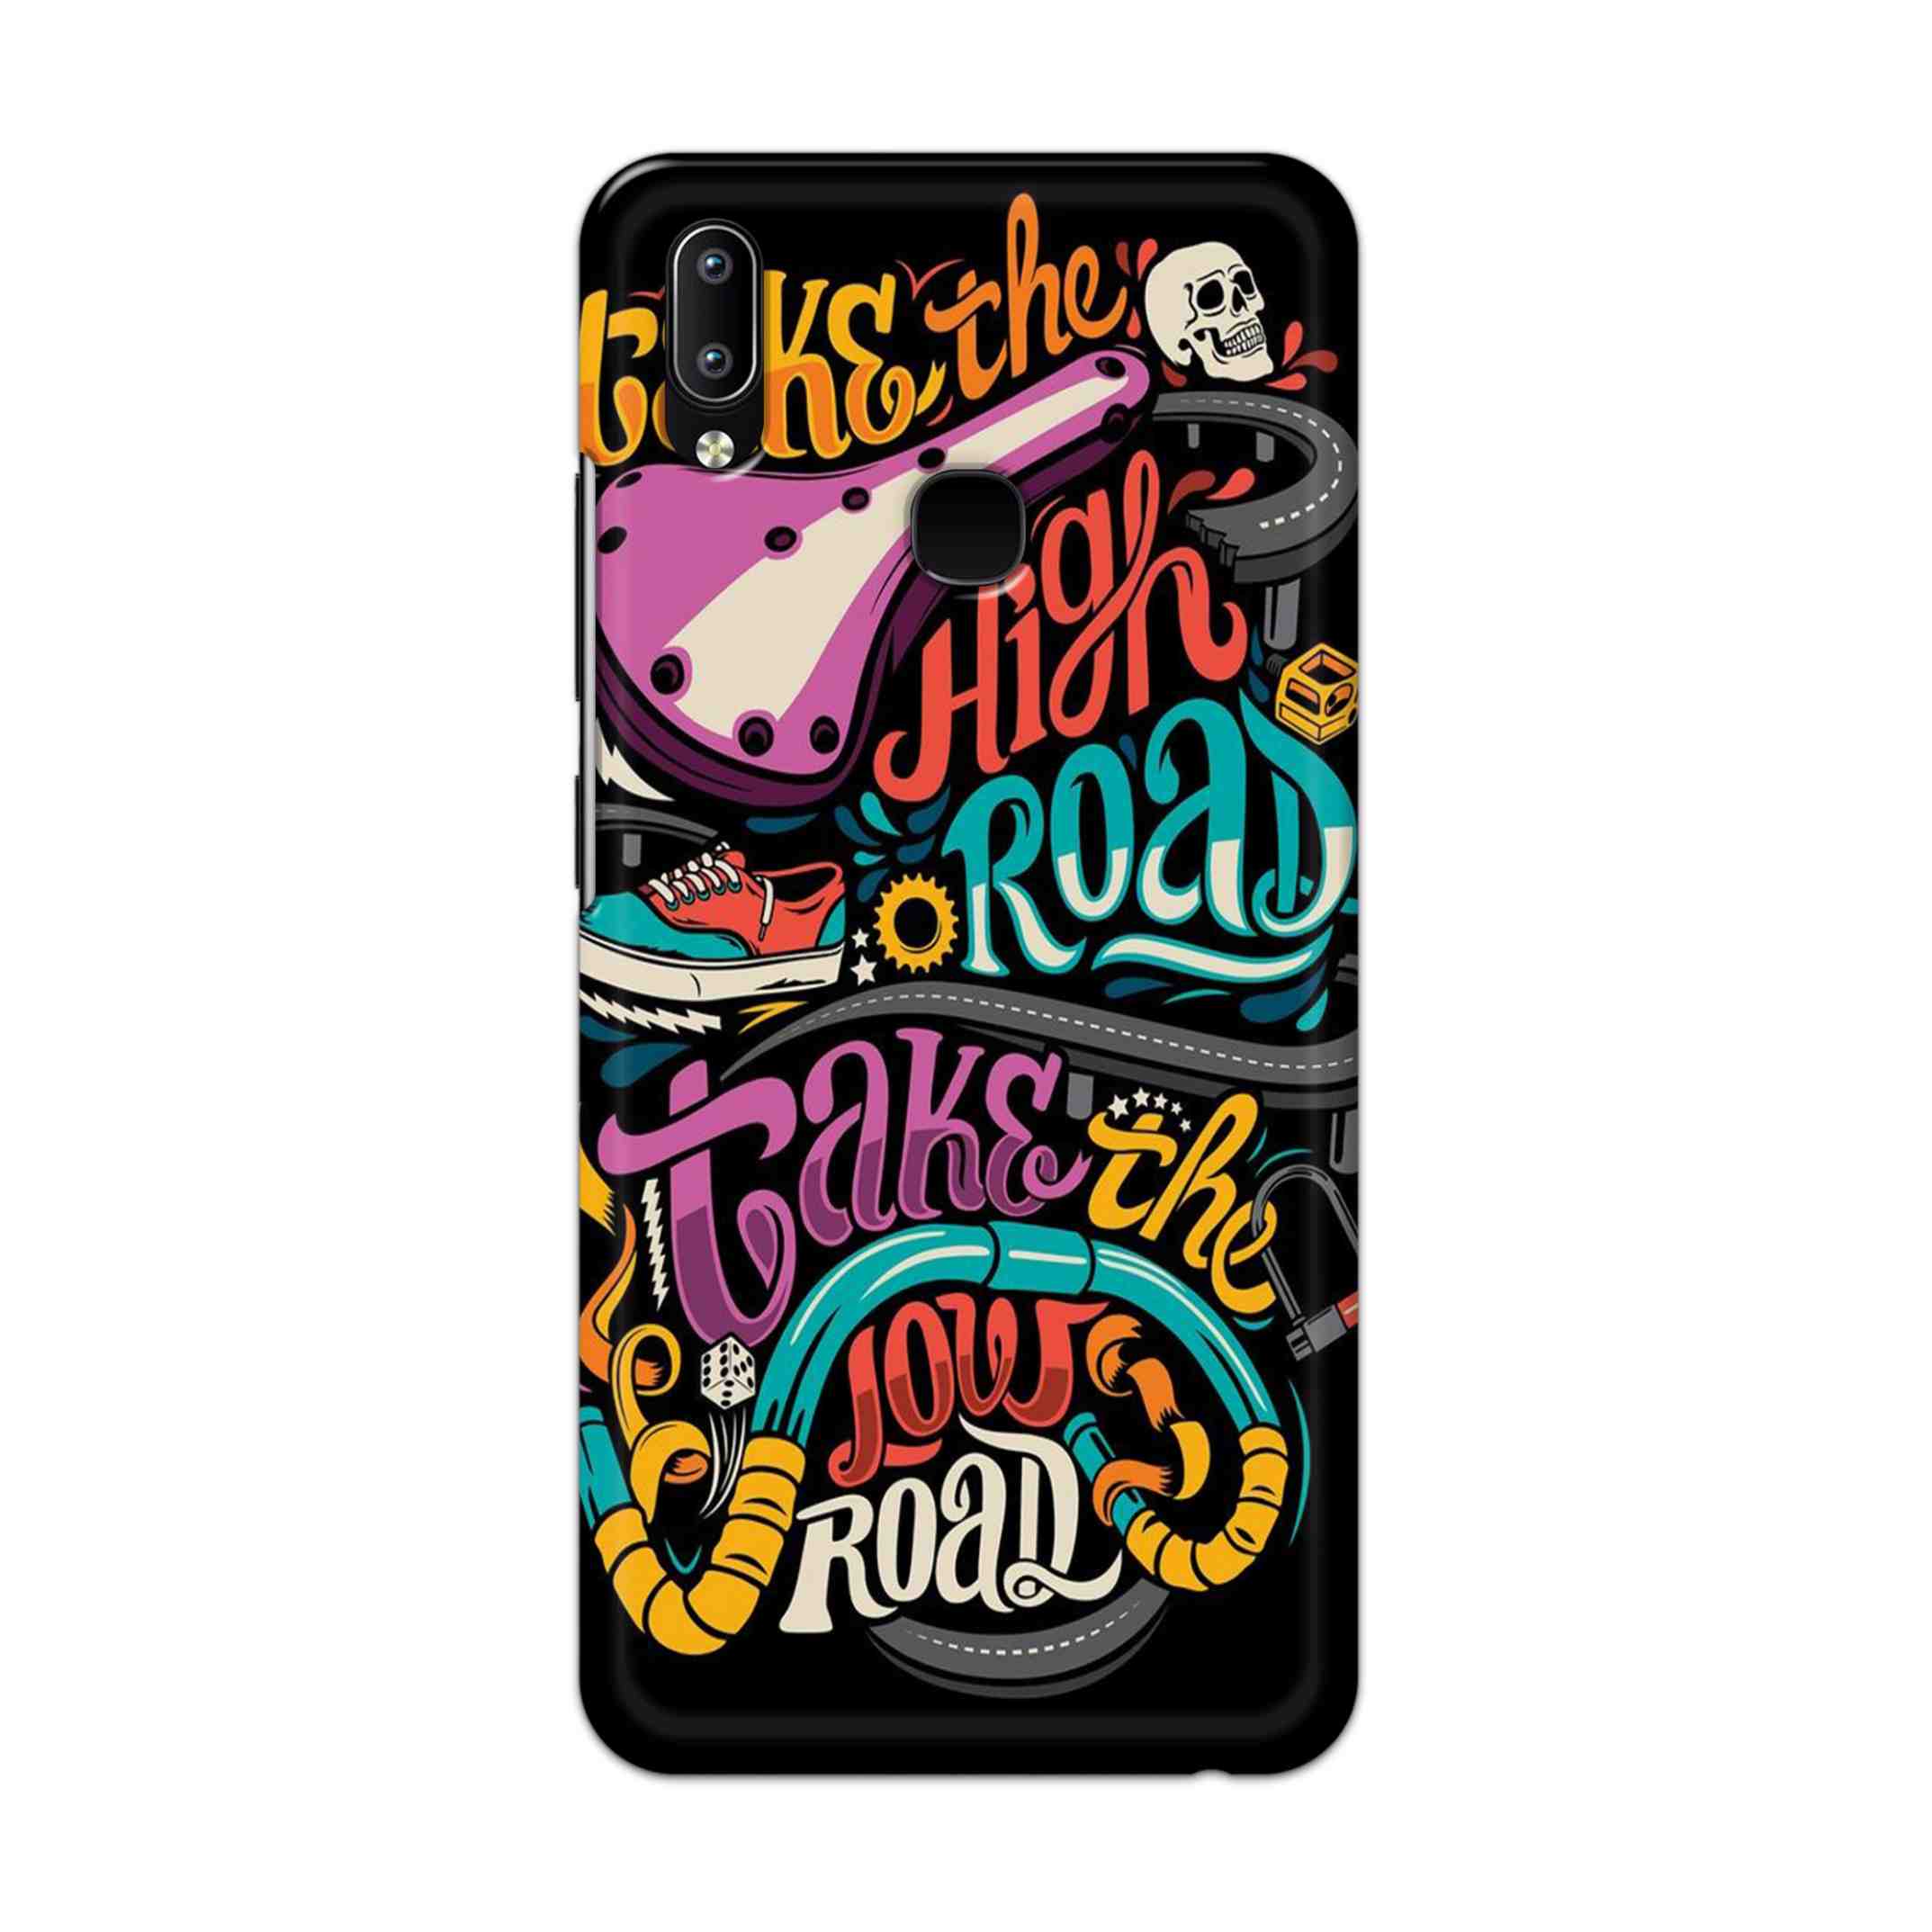 Buy Take The High Road Hard Back Mobile Phone Case Cover For Vivo Y95 / Y93 / Y91 Online